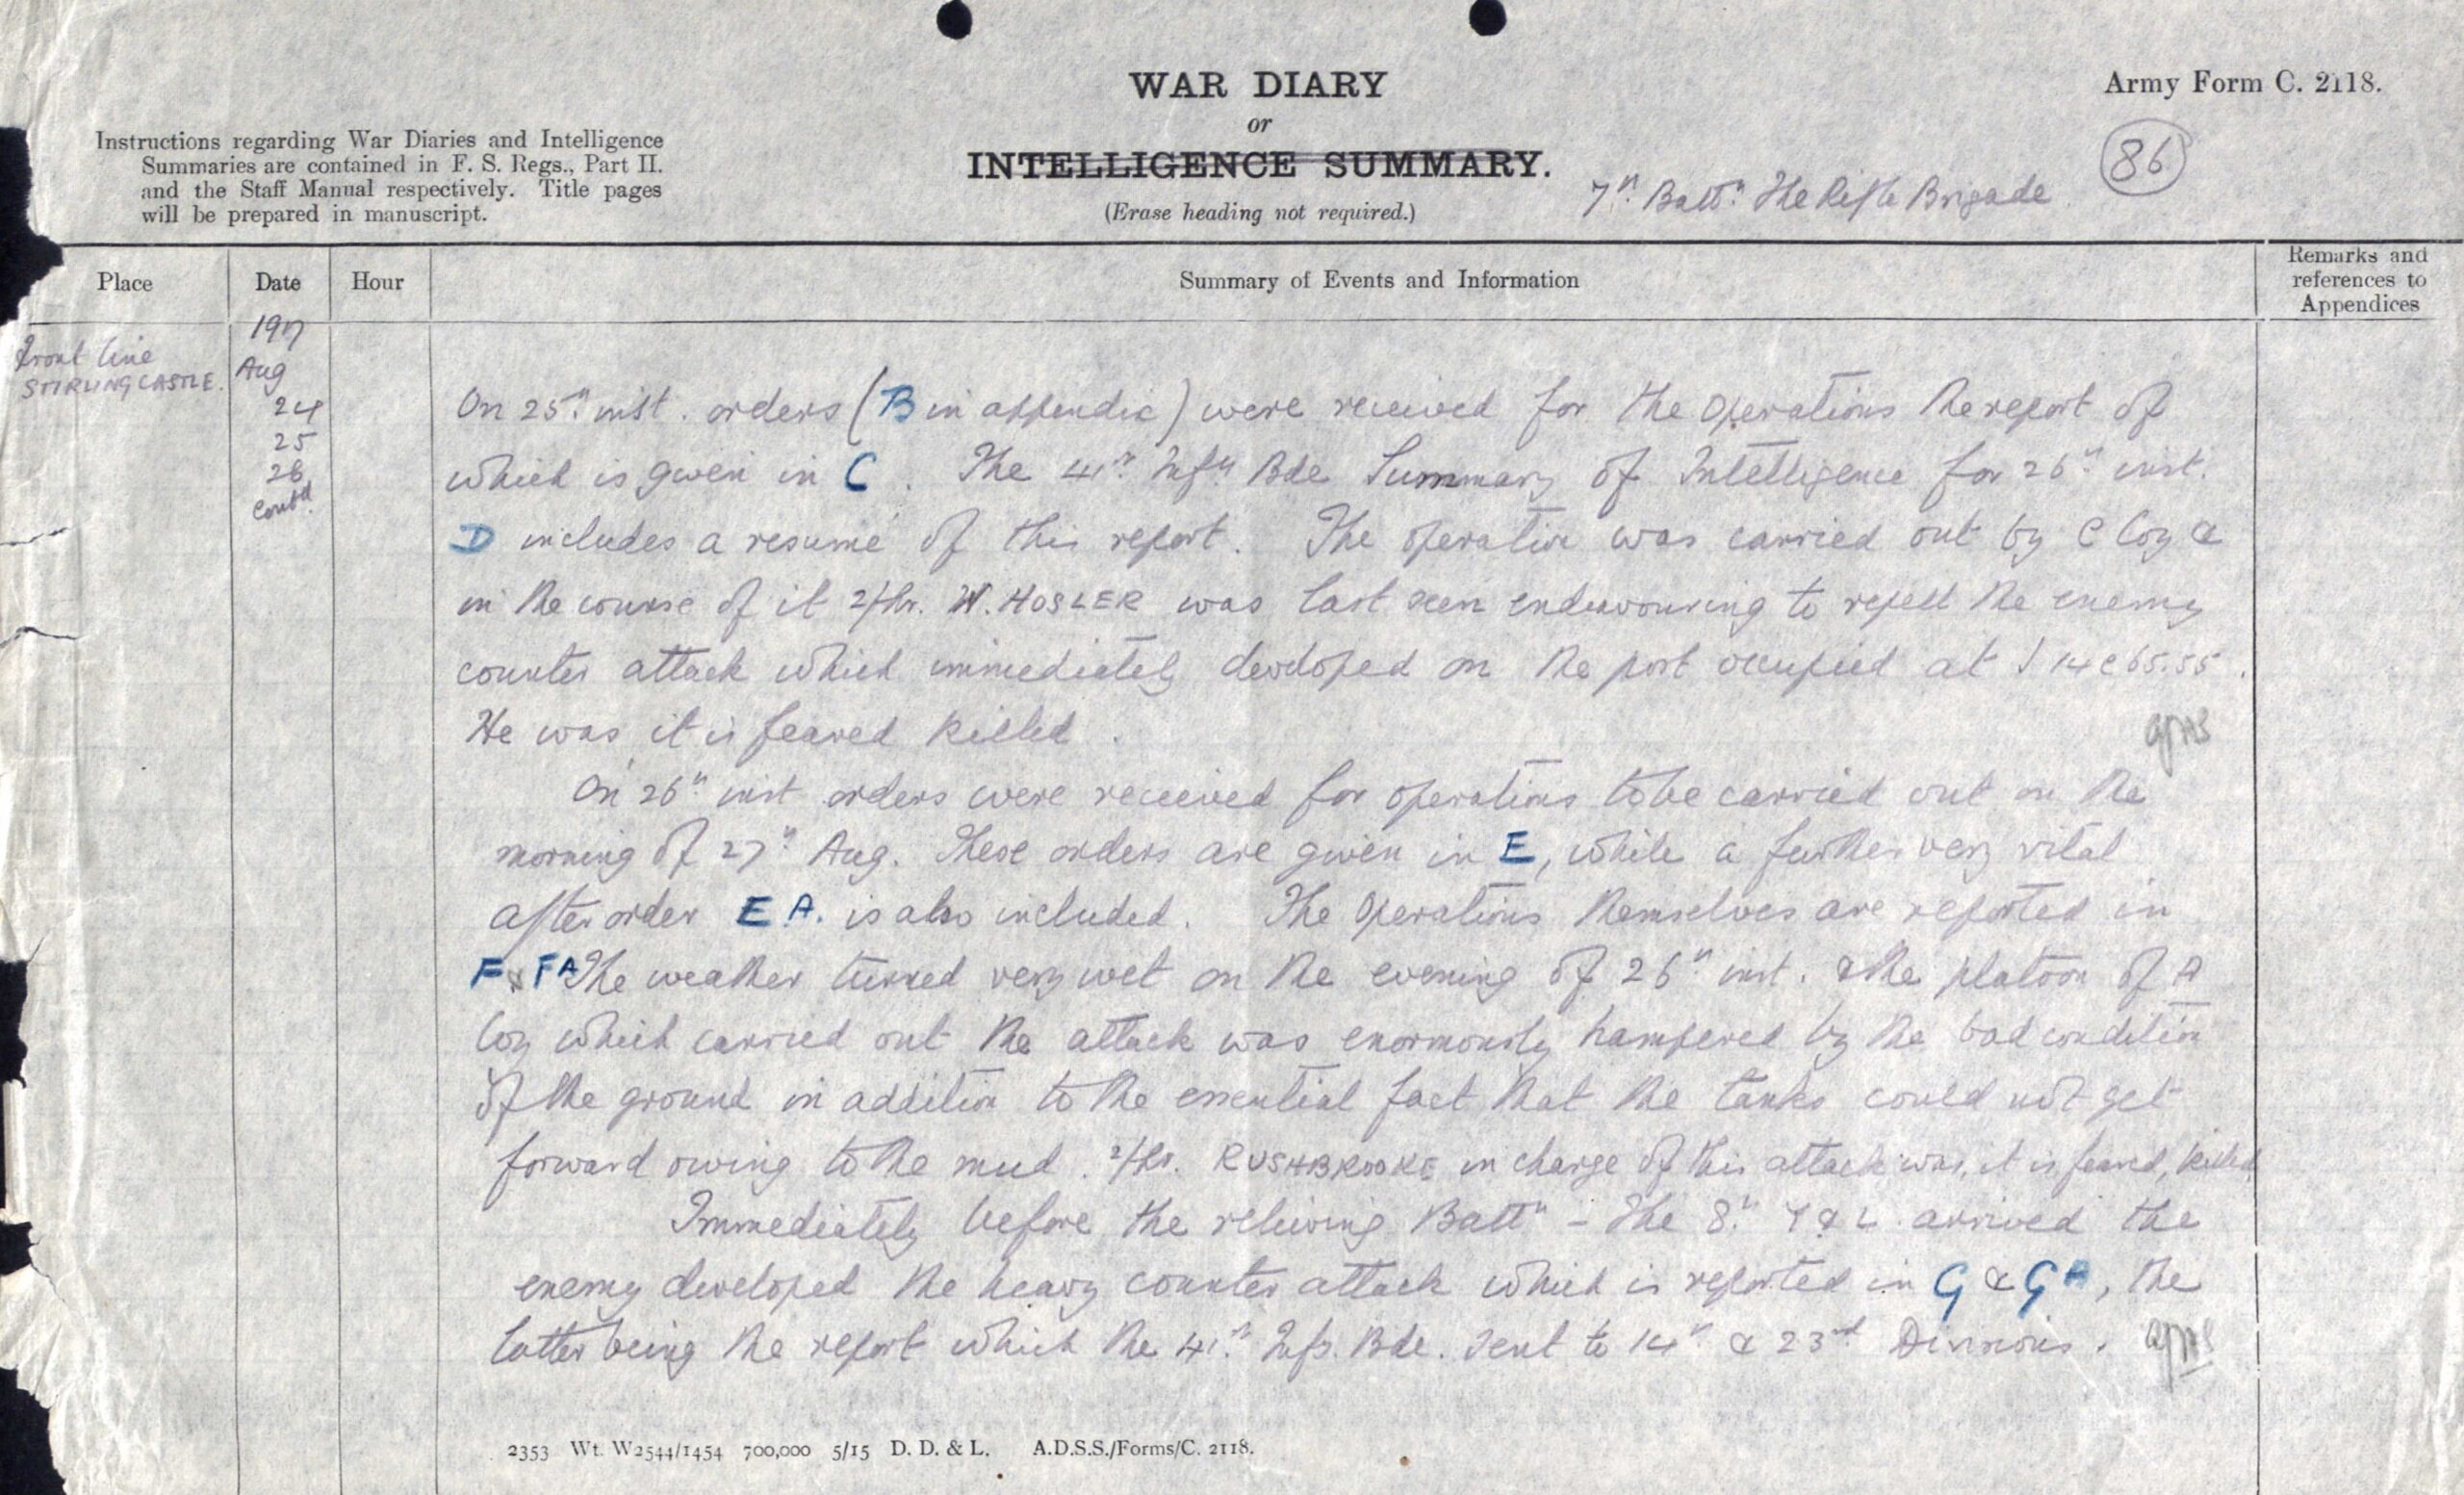 Extract from Battalion War Diary